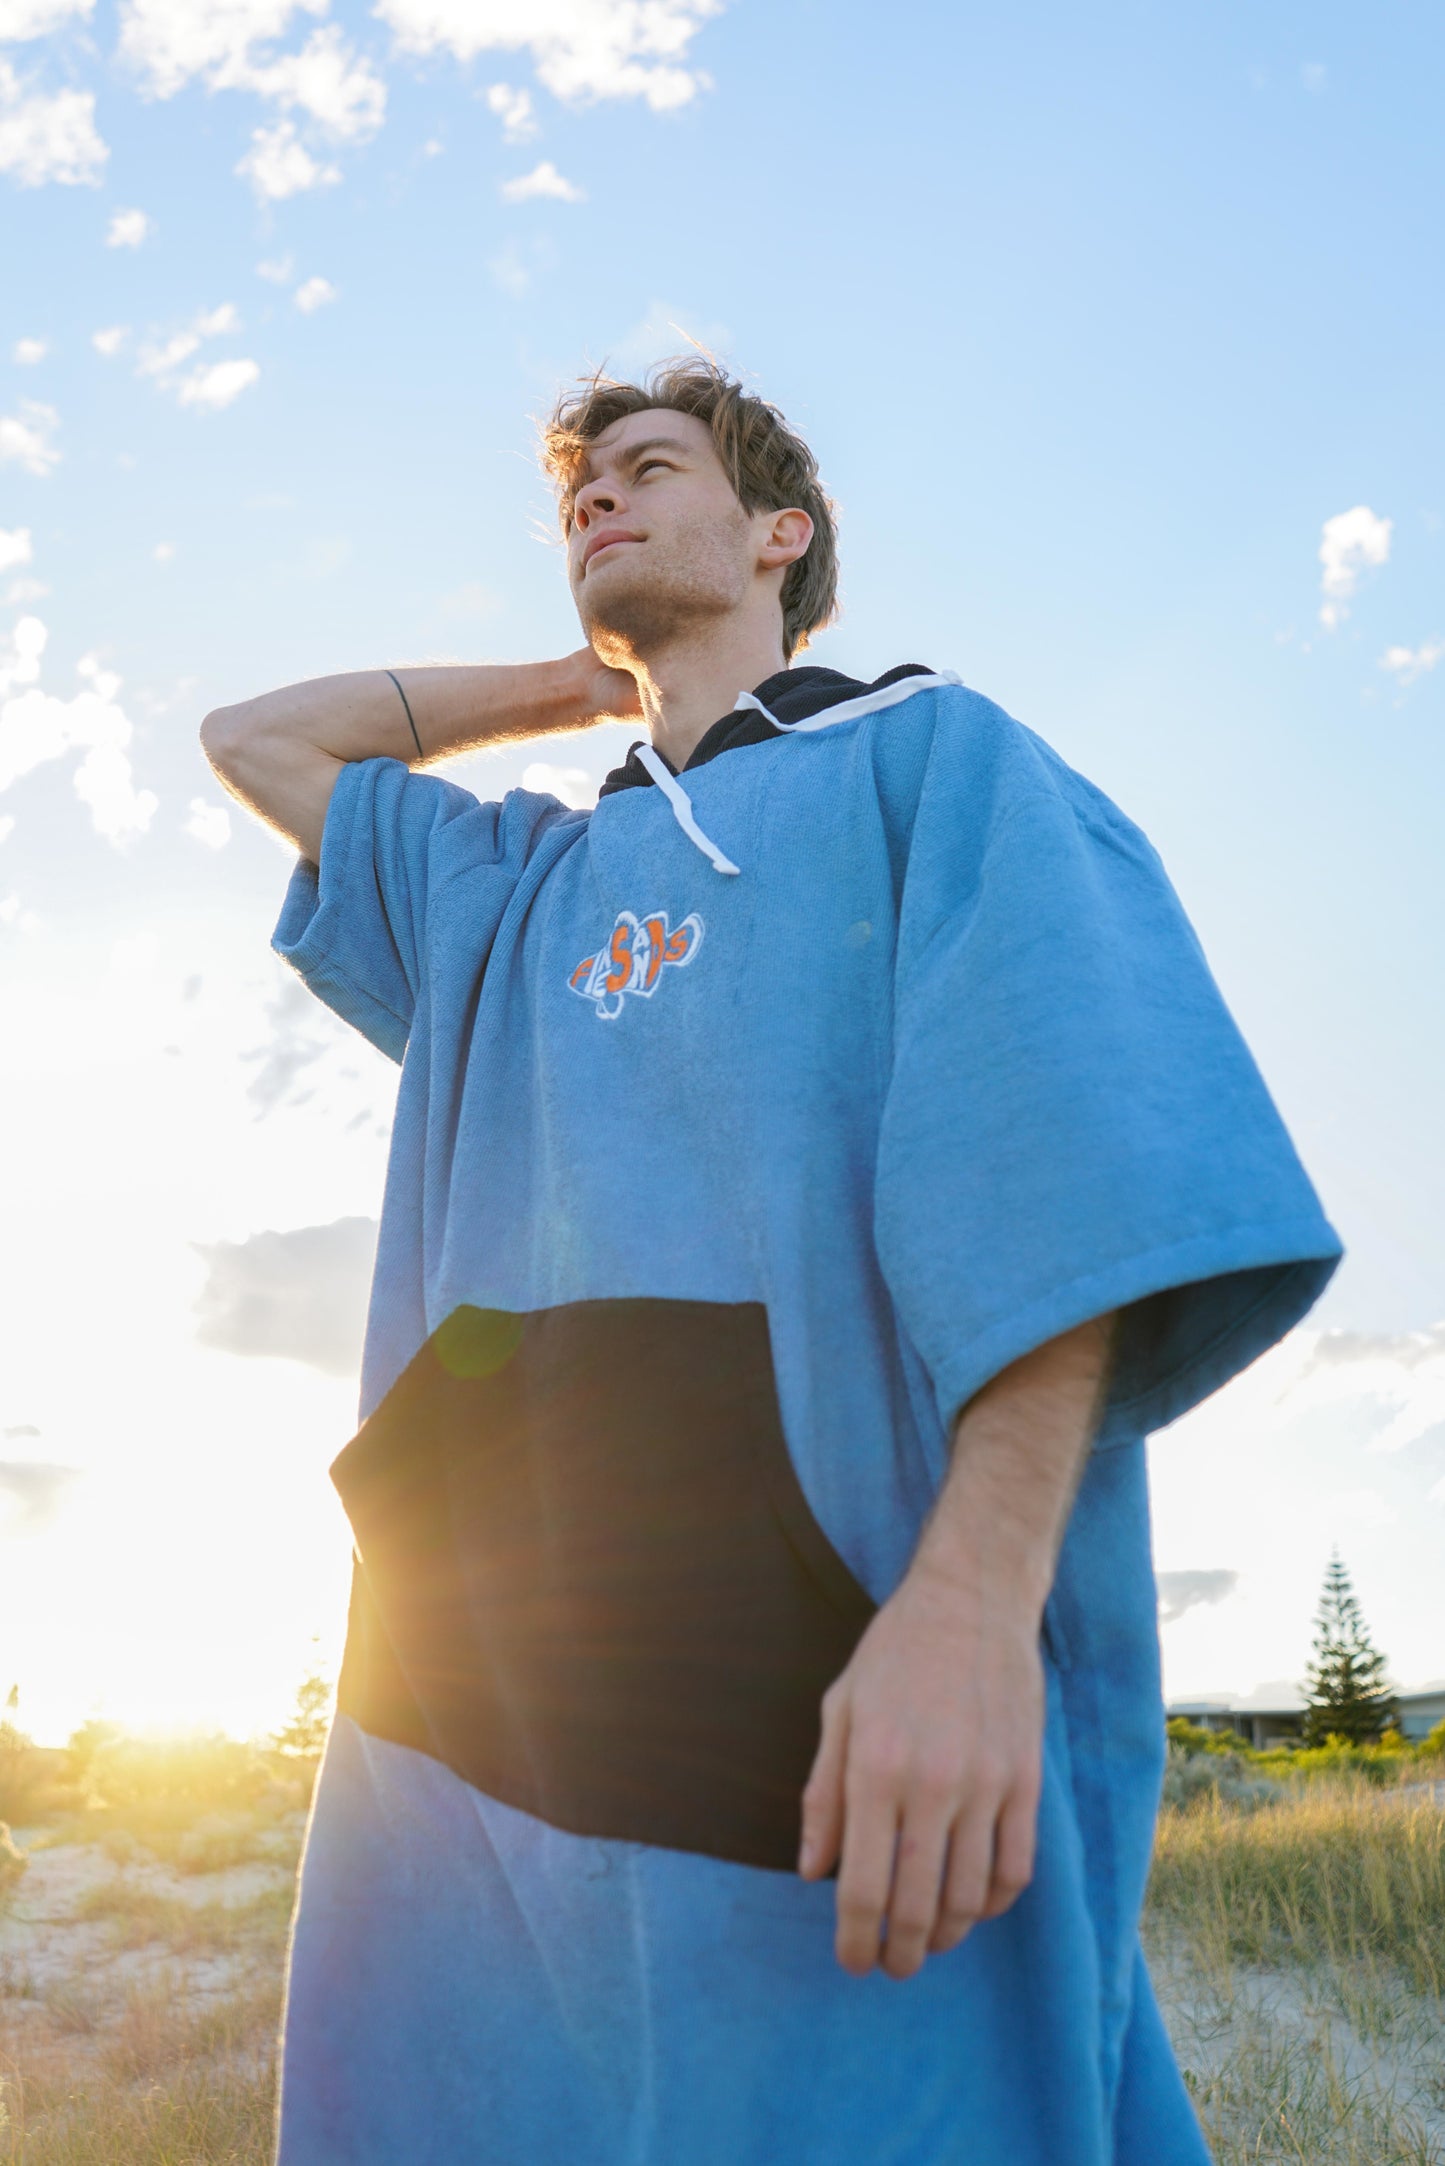 Funny Guy Hooded Towel Poncho - Blue and Black